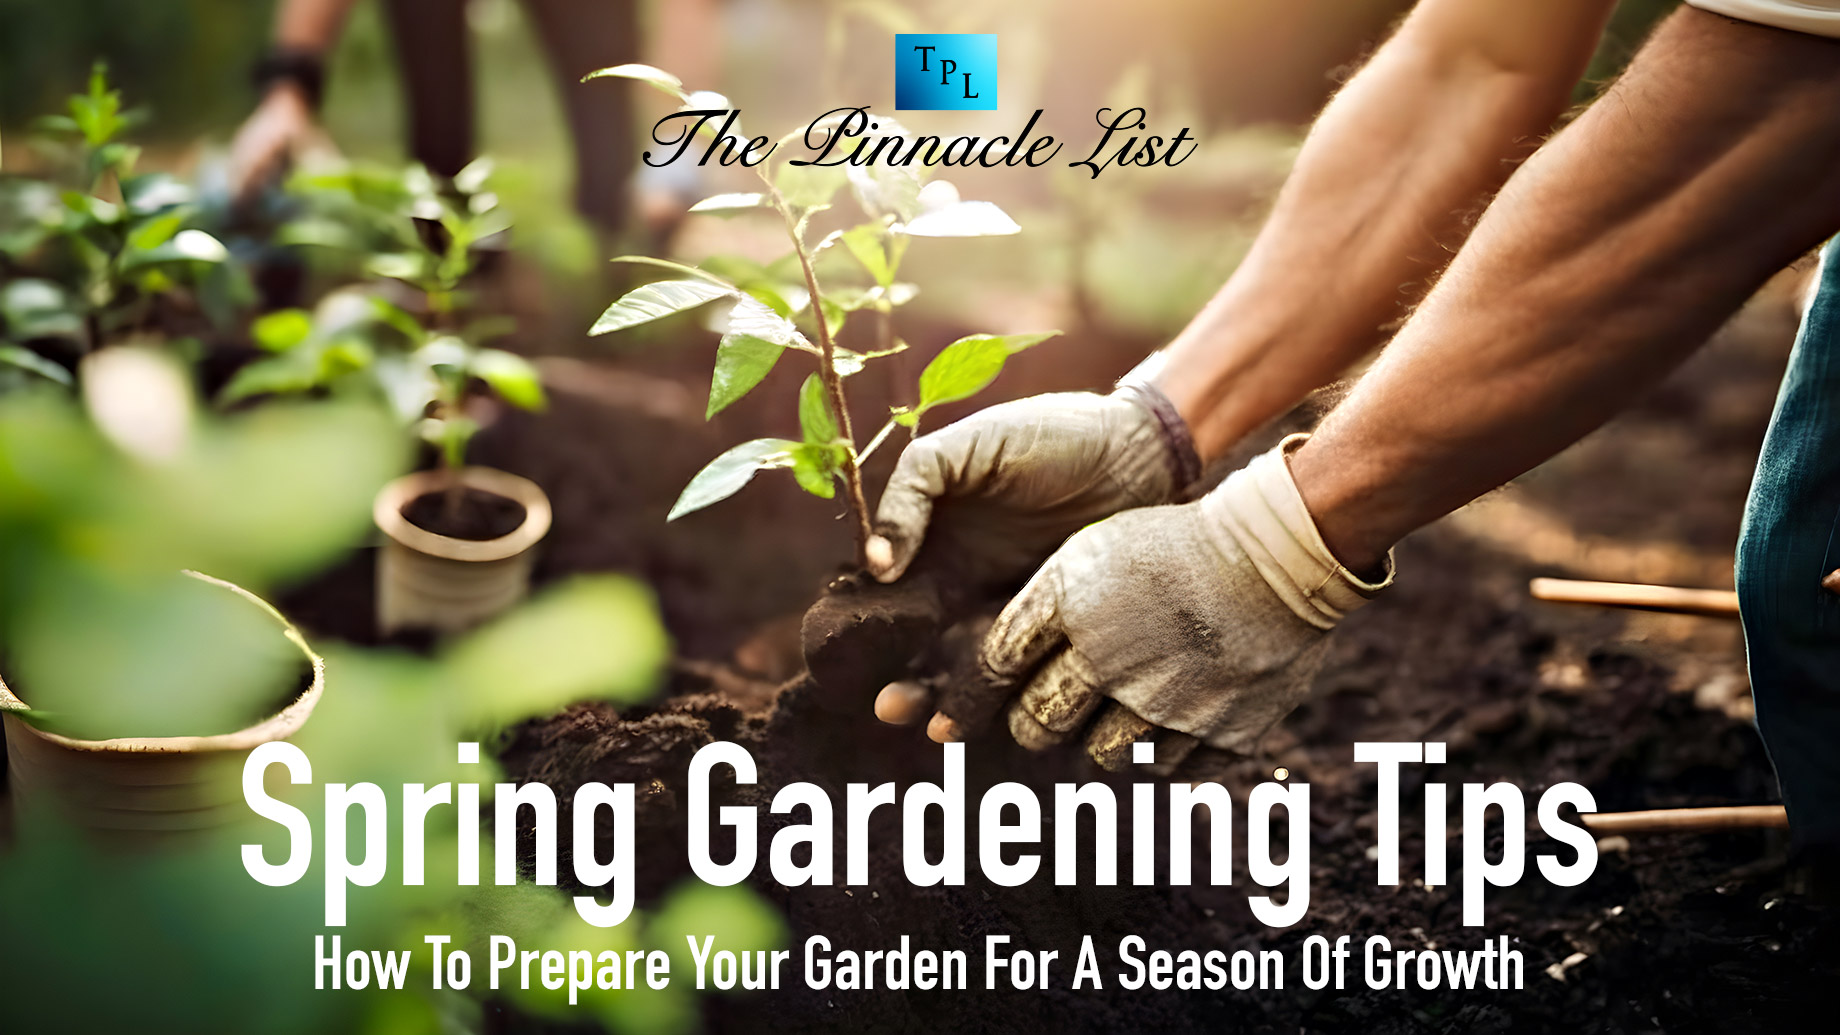 Spring Gardening Tips: How To Prepare Your Garden For A Season Of Growth